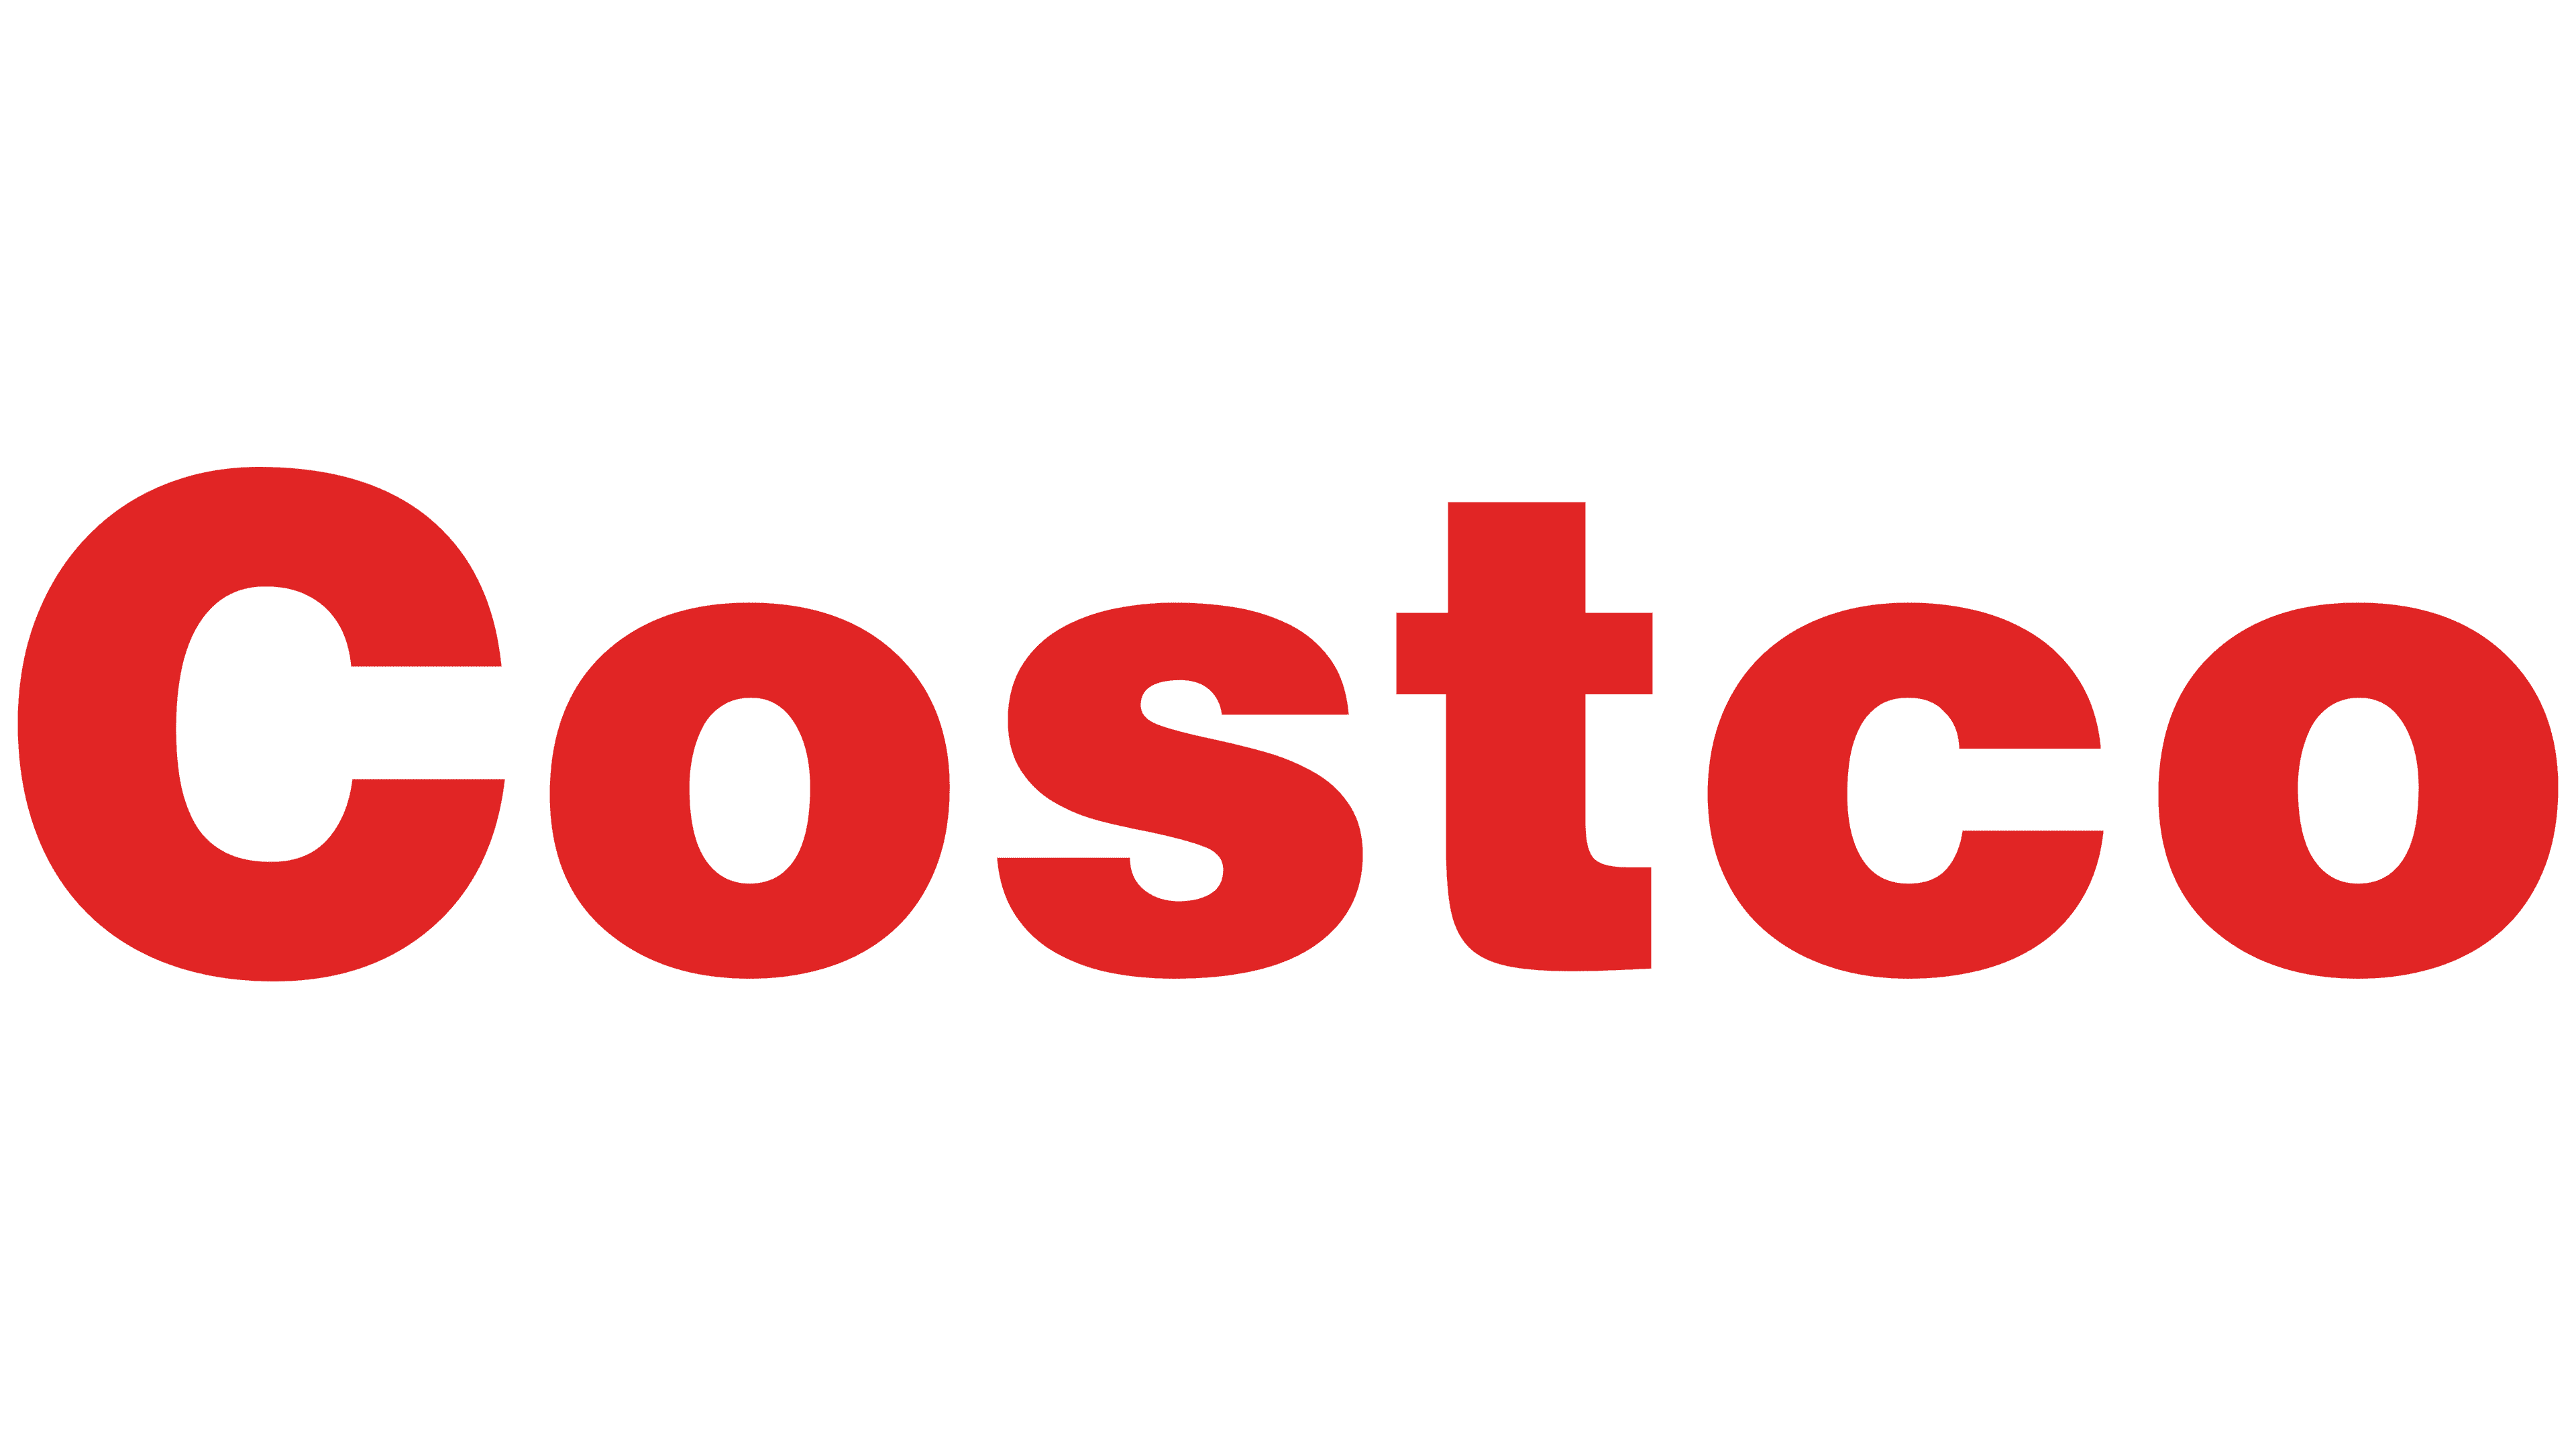 Costco Logo, symbol, meaning, history, PNG